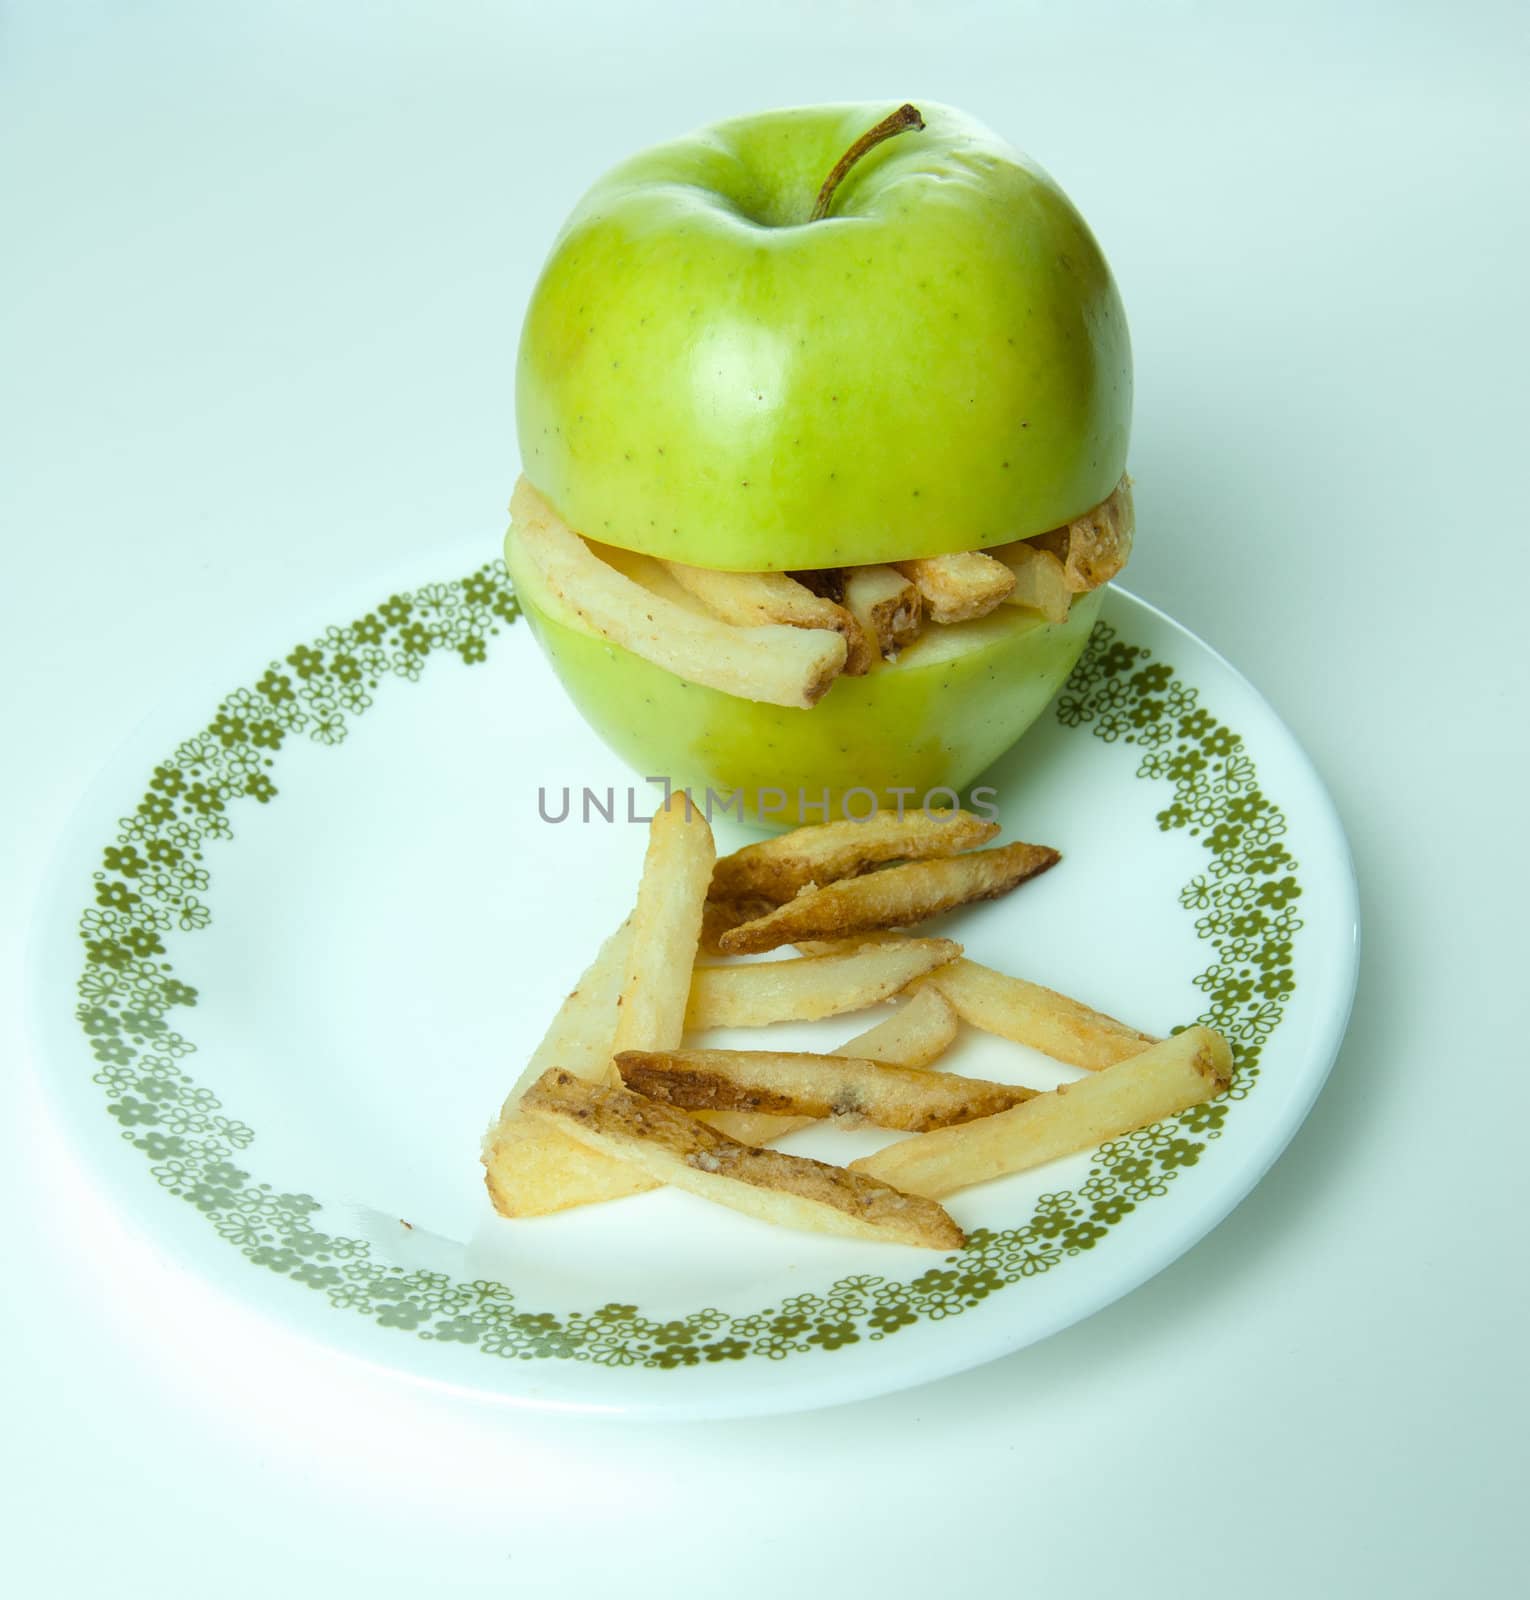 Concept image of unhealthy eating with an apple making a sandwich of french fries.